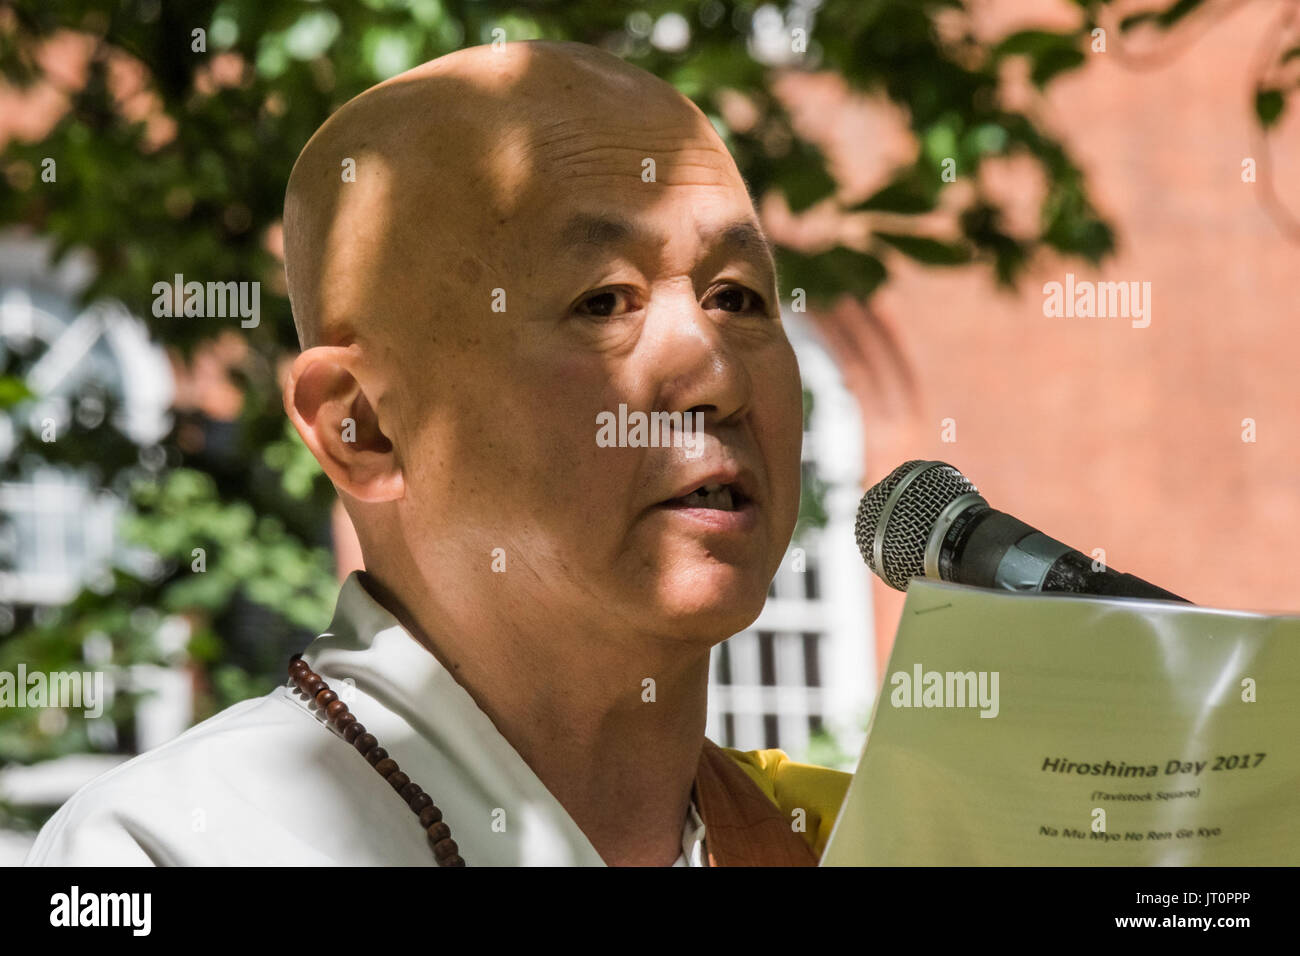 London, UK. 6th Aug, 2017. London, UK. 6th August 2017. Buddhist monk from the Battersea monastery and Peace Pagoda Reverend Gyoro Nagase speaking at the London CND ceremony in memory of the victims, past and present on the 72nd anniversary of the dropping of the atomic bomb on Hiroshima and the second atomic bomb dropped on Nagasaki three days later. After a number of speeches and performances there was a minute's silence during which the Deputy Mayor of Camden and others laid flowers around the commemorative cherry tree. Peter Marshall ImagesLive (Credit Image: © Peter Marshall/ImagesLive Stock Photo